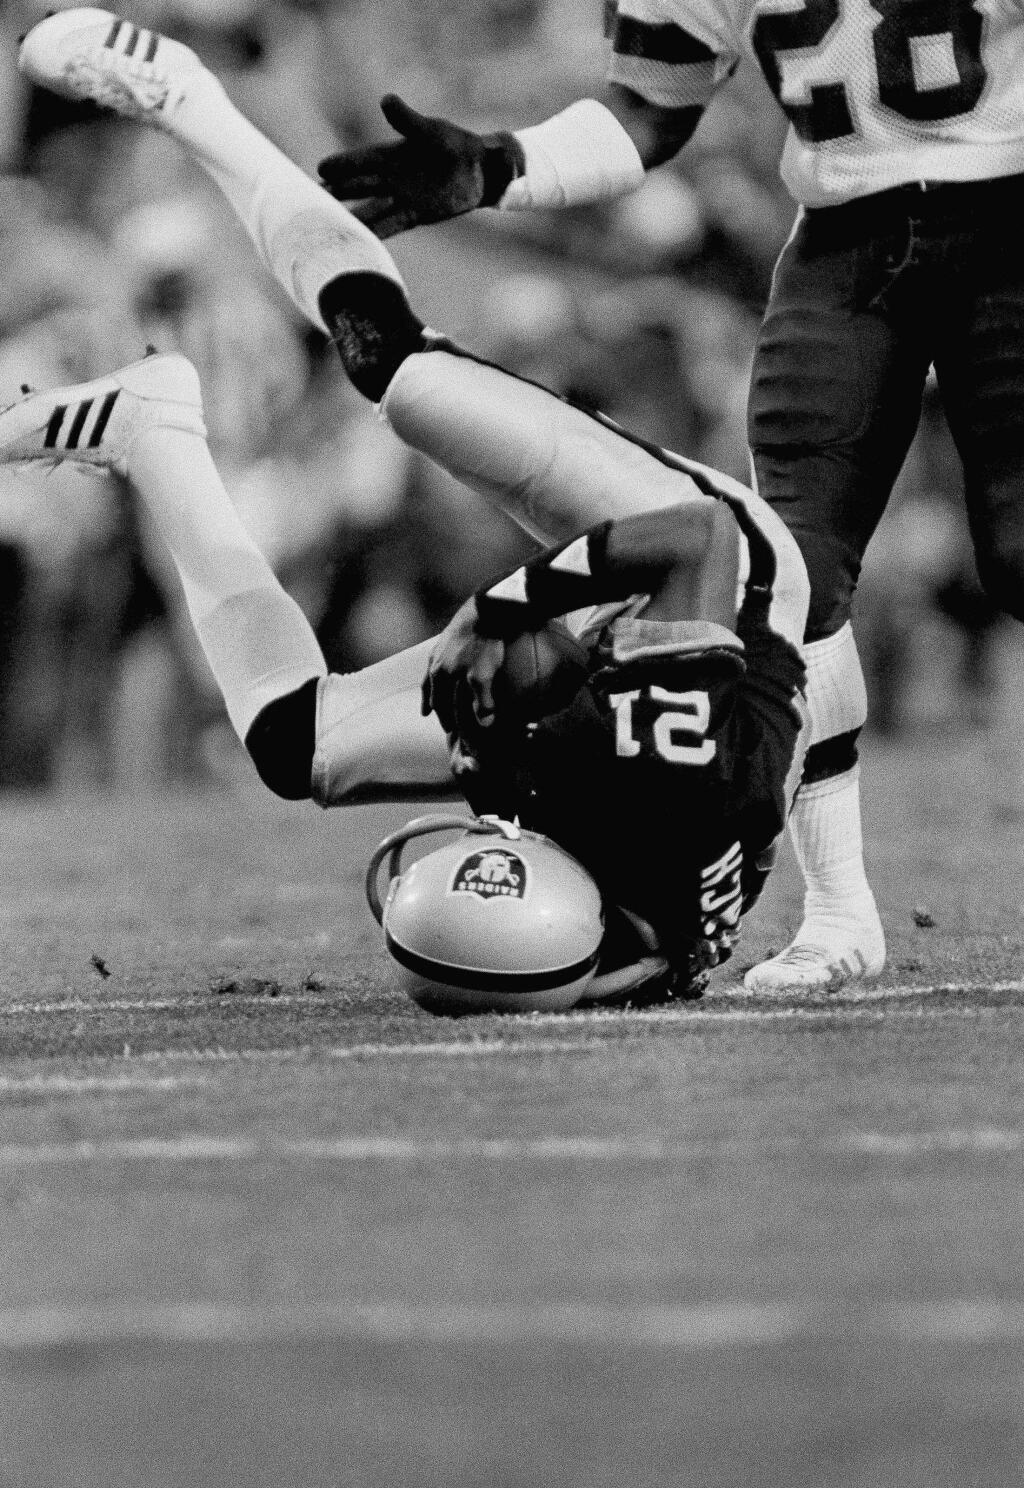 The Los Angeles Raiders' Cliff Branch tumbles to the ground after catching a long pass from quarterback Jim Plunkett during second-quarter action in Super Bowl XVIII against the Washington Redskins in Tampa, Sunday, Jan. 22, 1984. (AP Photo)